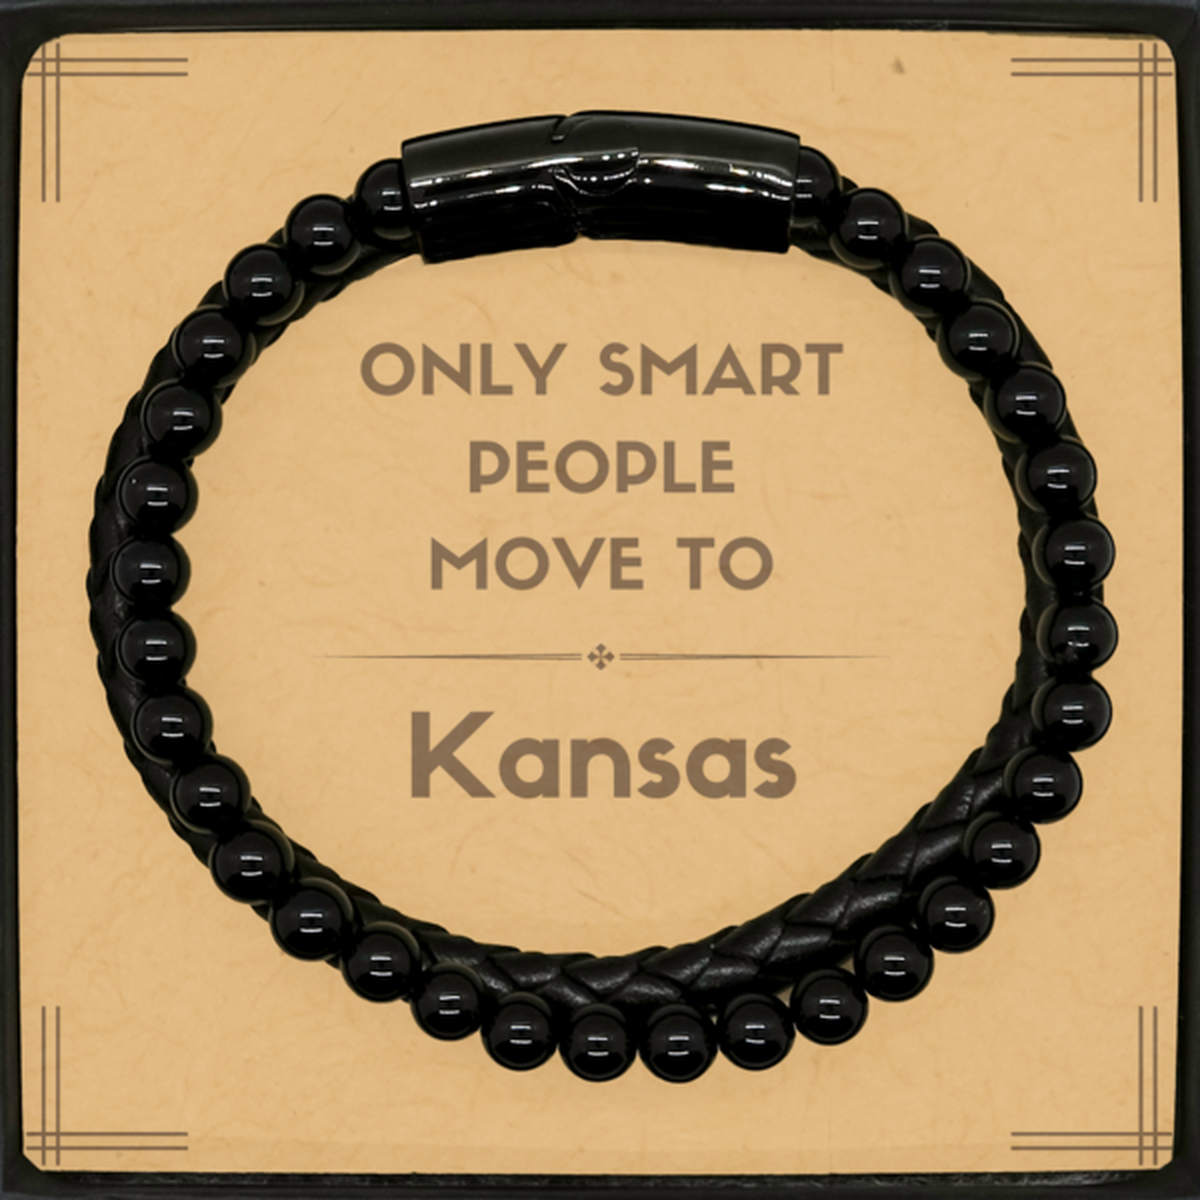 Only smart people move to Kansas Stone Leather Bracelets, Message Card Gifts For Kansas, Move to Kansas Gifts for Friends Coworker Funny Saying Quote